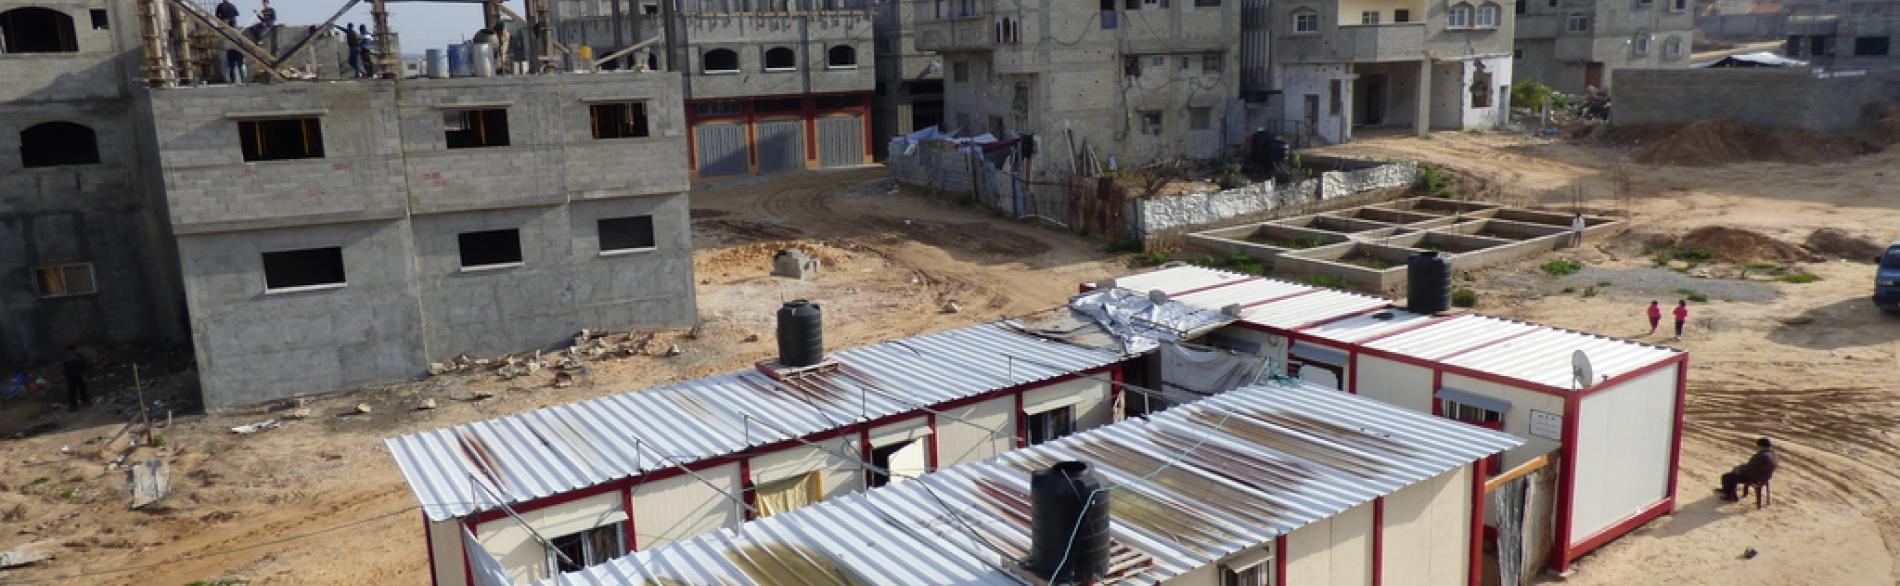 Caravans provided to displaced families and buildings under reconstruction in Shuja’iyeh neighbourhood, Gaza city, January 2016. © Photo by OCHA